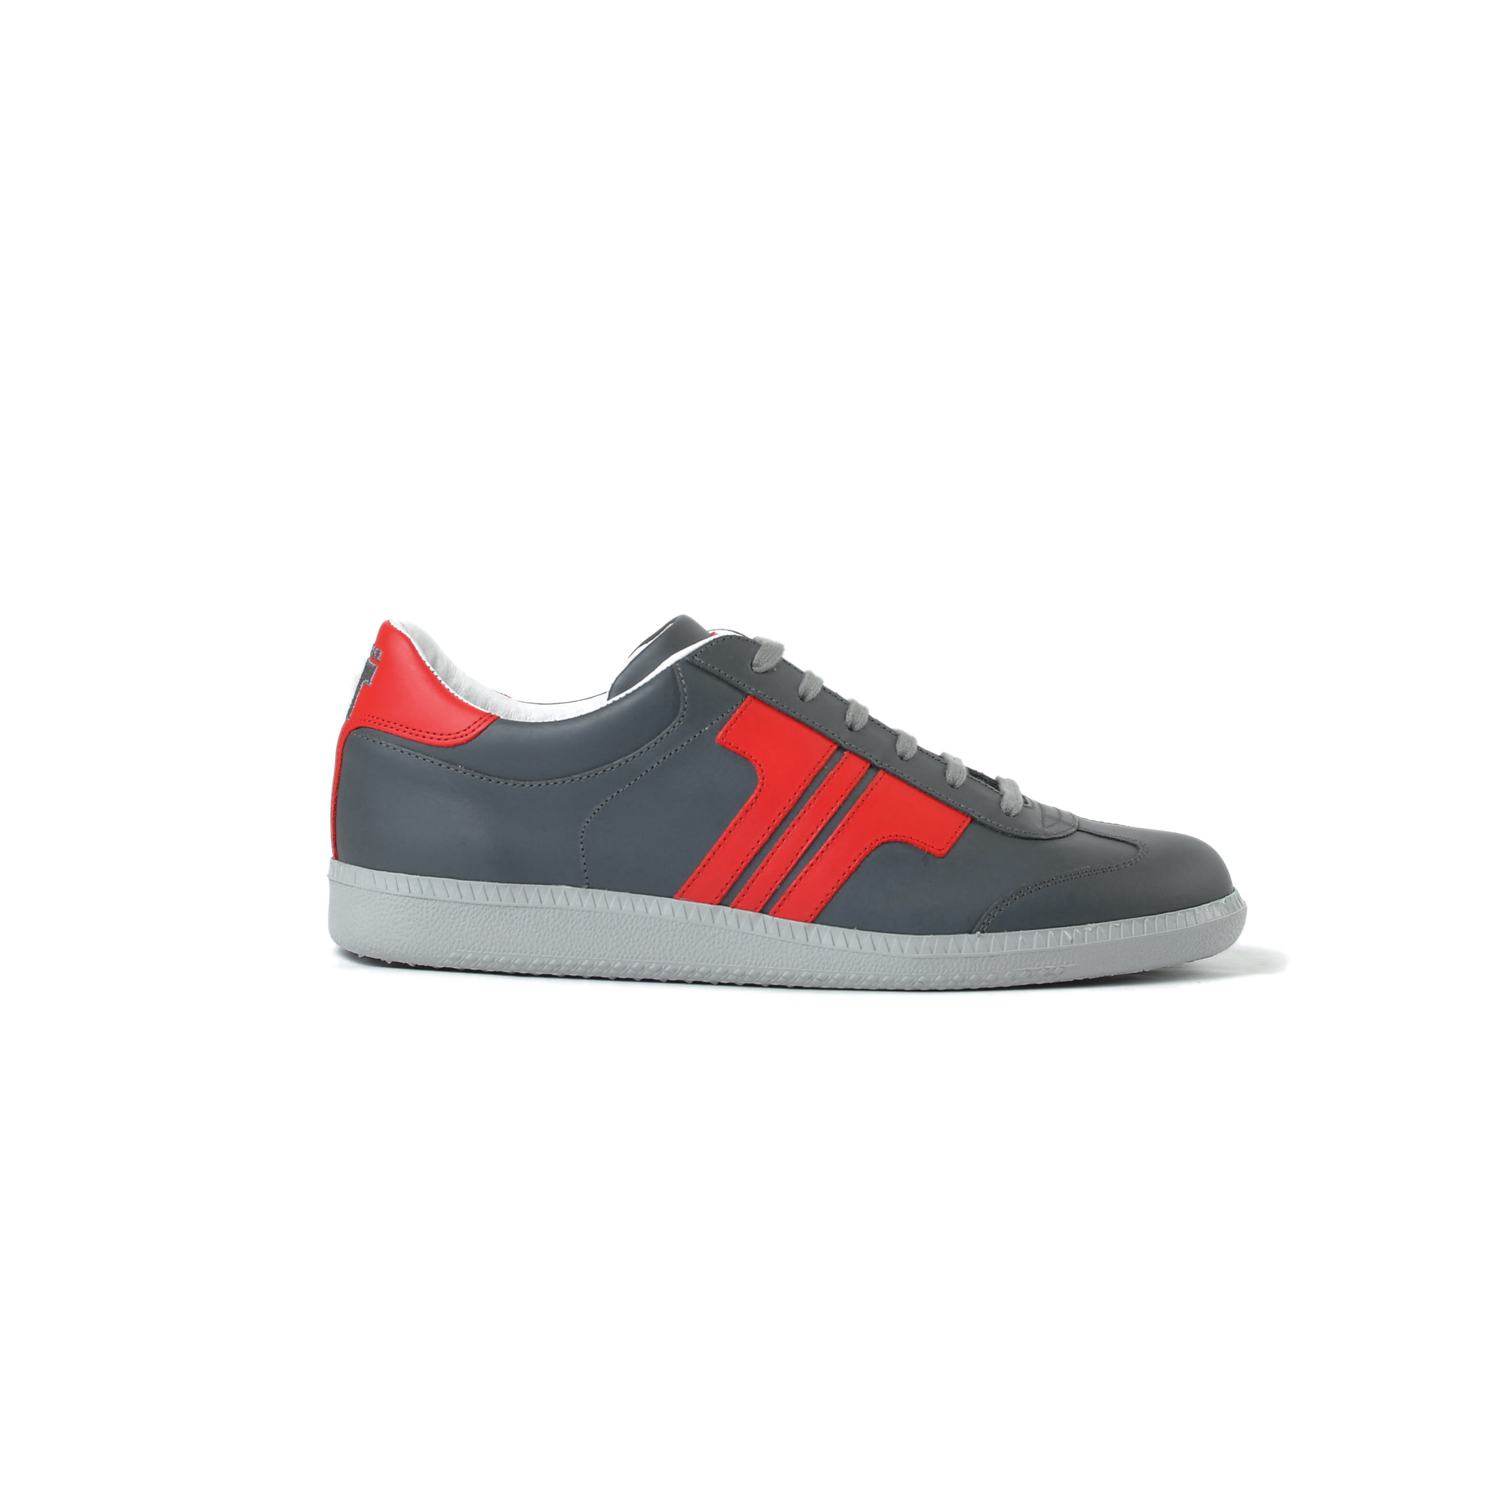 Tisza shoes - Compakt - Grey-red